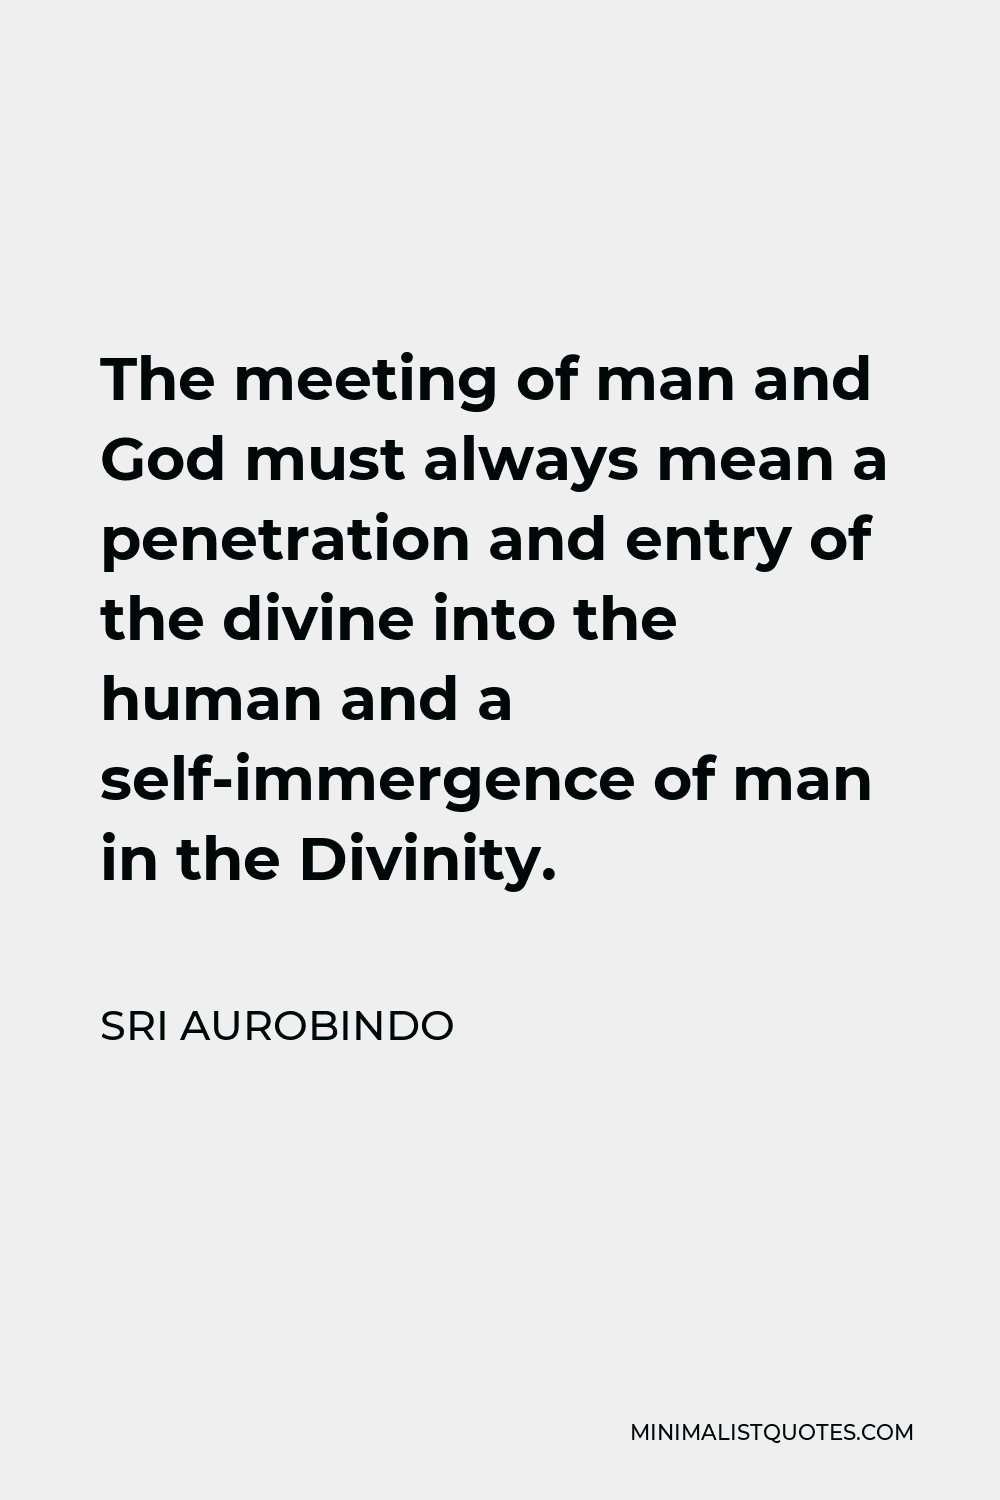 Sri Aurobindo Quote - The meeting of man and God must always mean a penetration and entry of the divine into the human and a self-immergence of man in the Divinity.